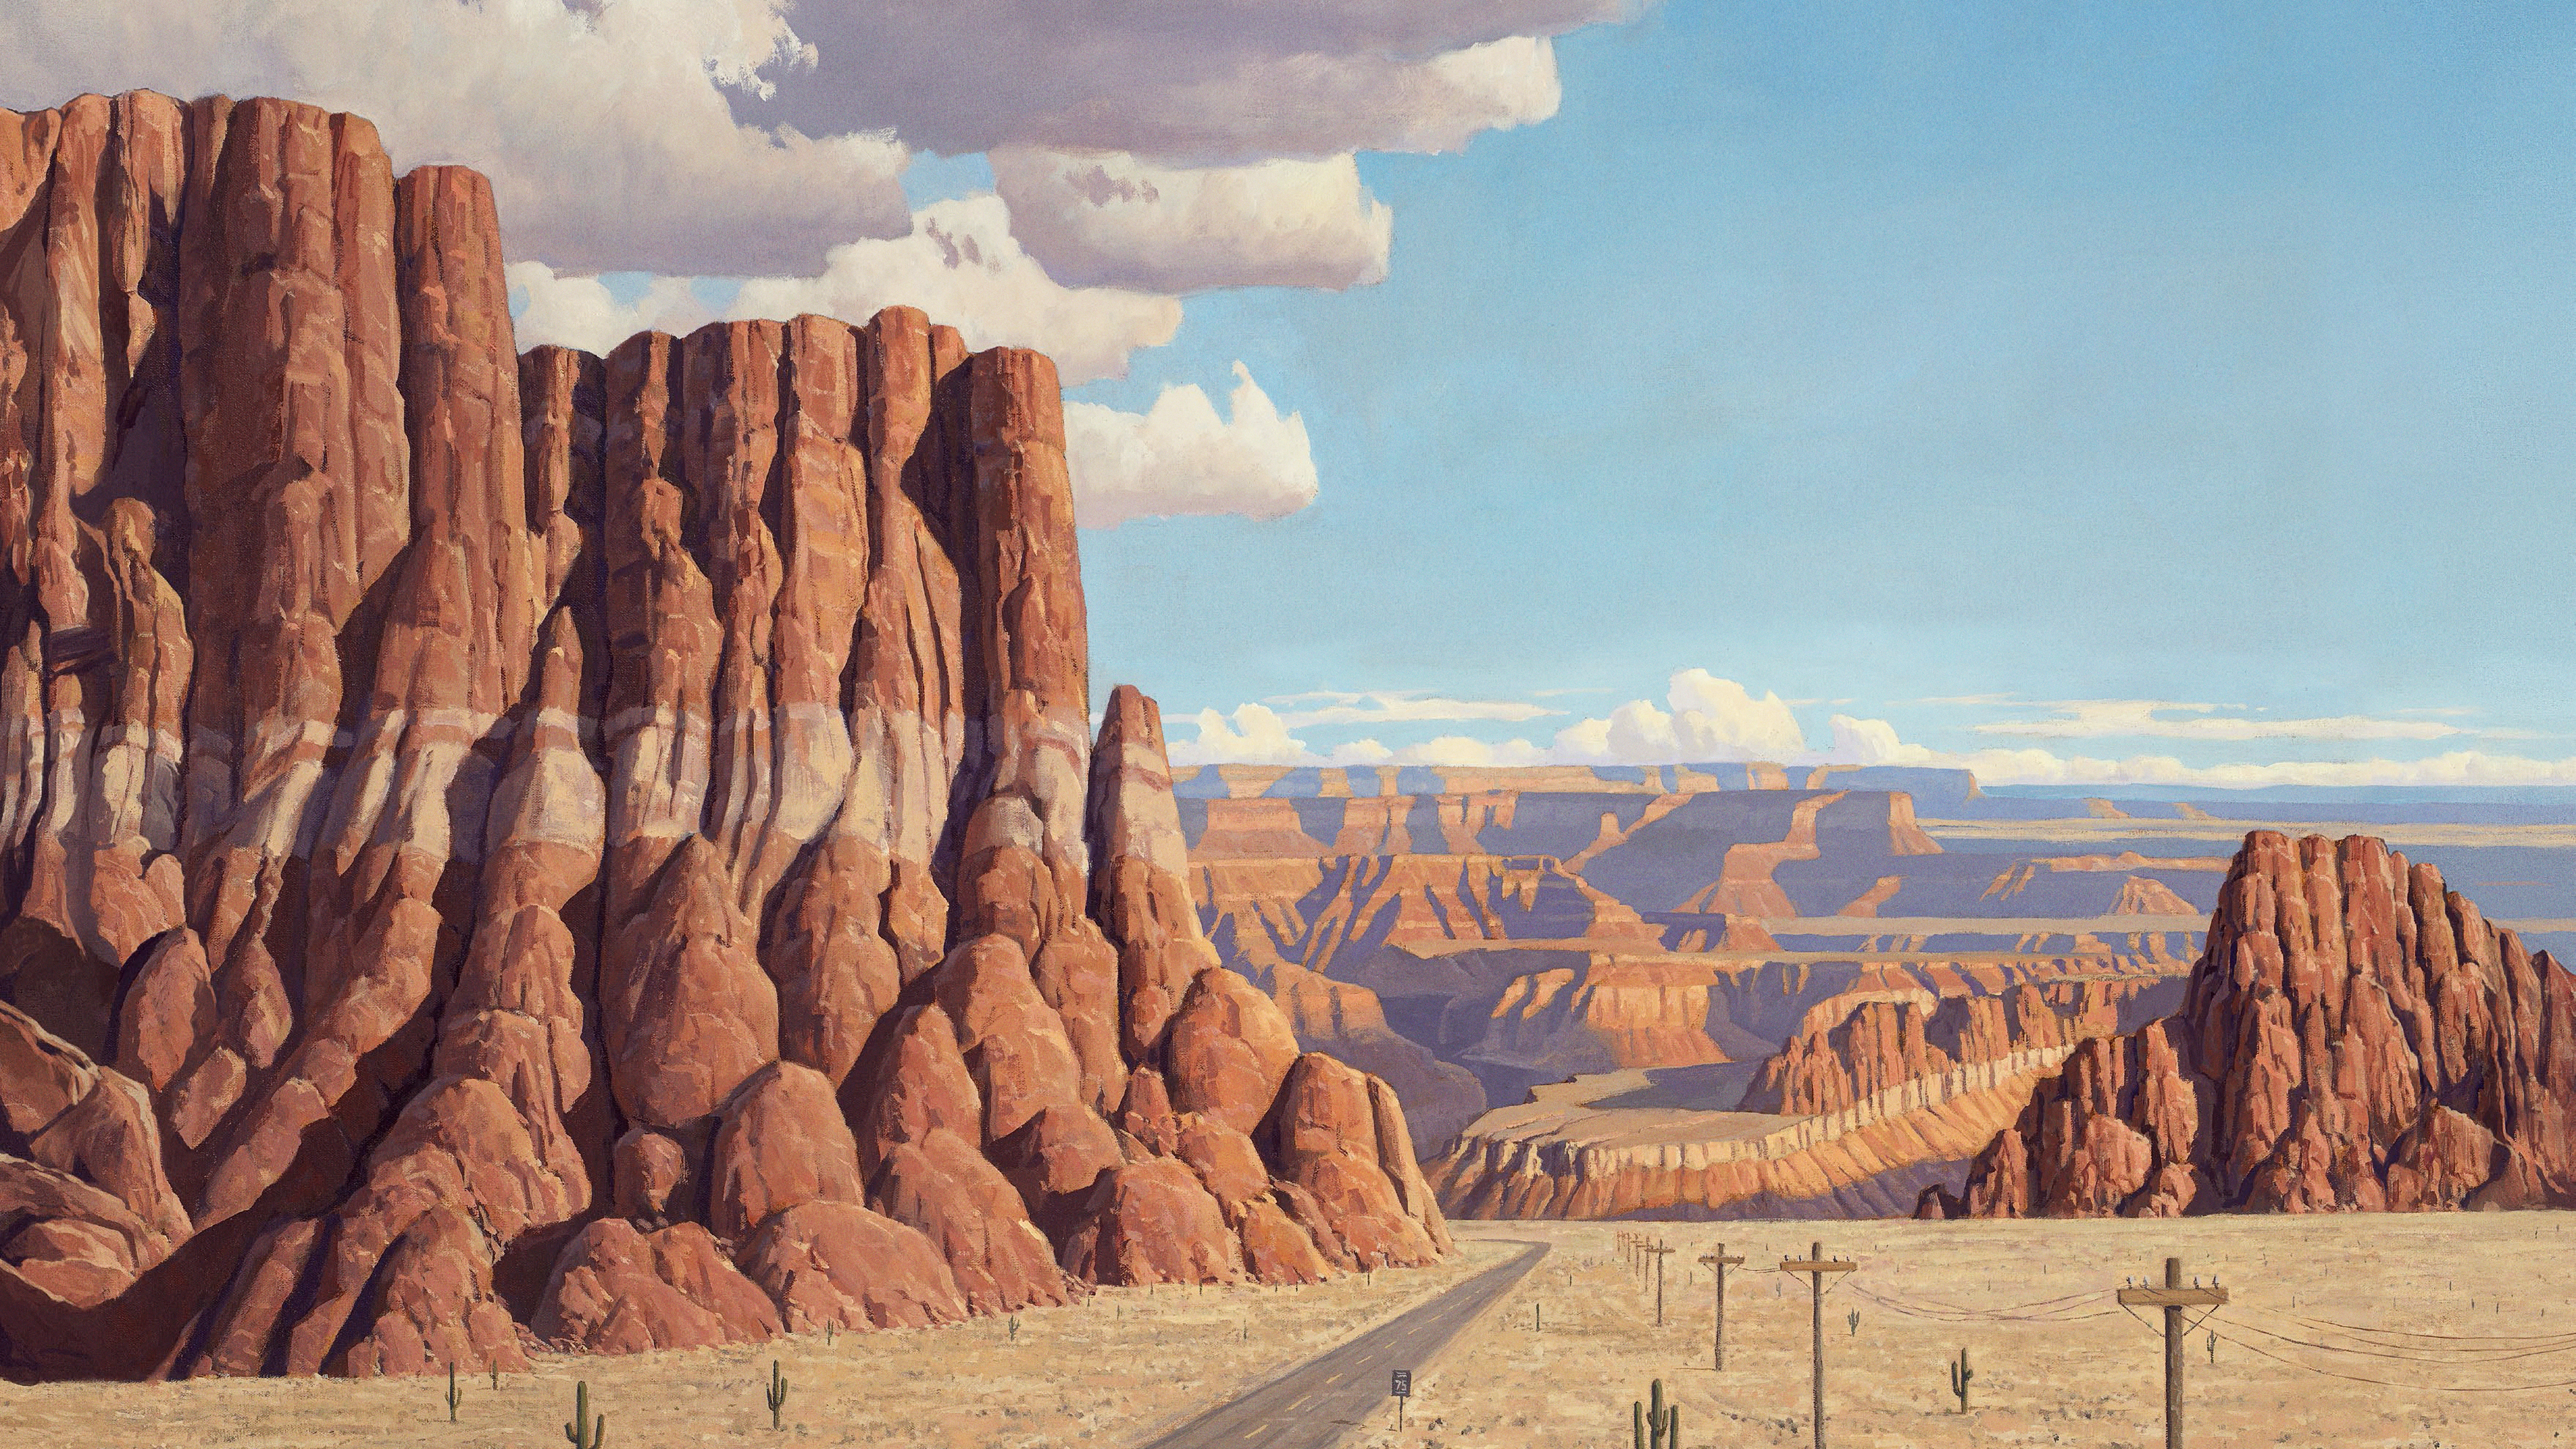 Asteroid City Movie Poster Movies Wes Anderson Digital Art Desert Canyon Rock Formation Road Electri 3517x1978